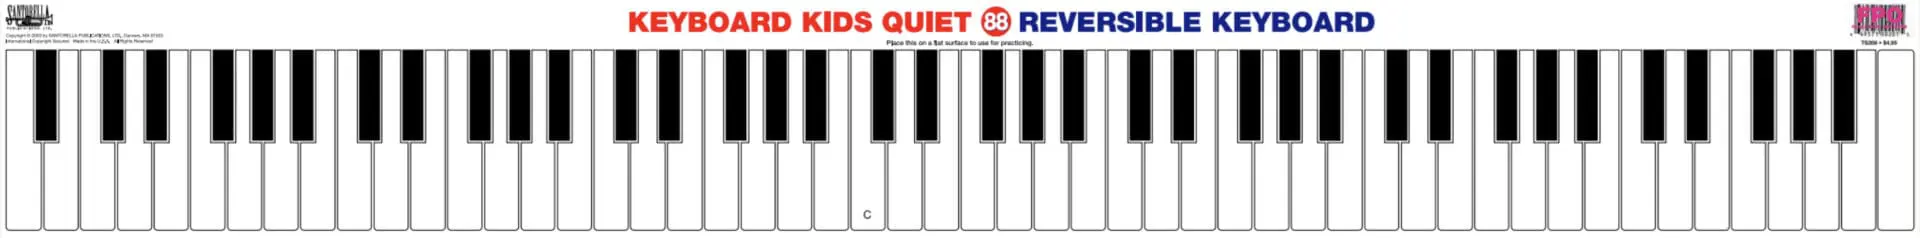 A piano keyboard with the keys labeled " kids quiet 8 8 review ".